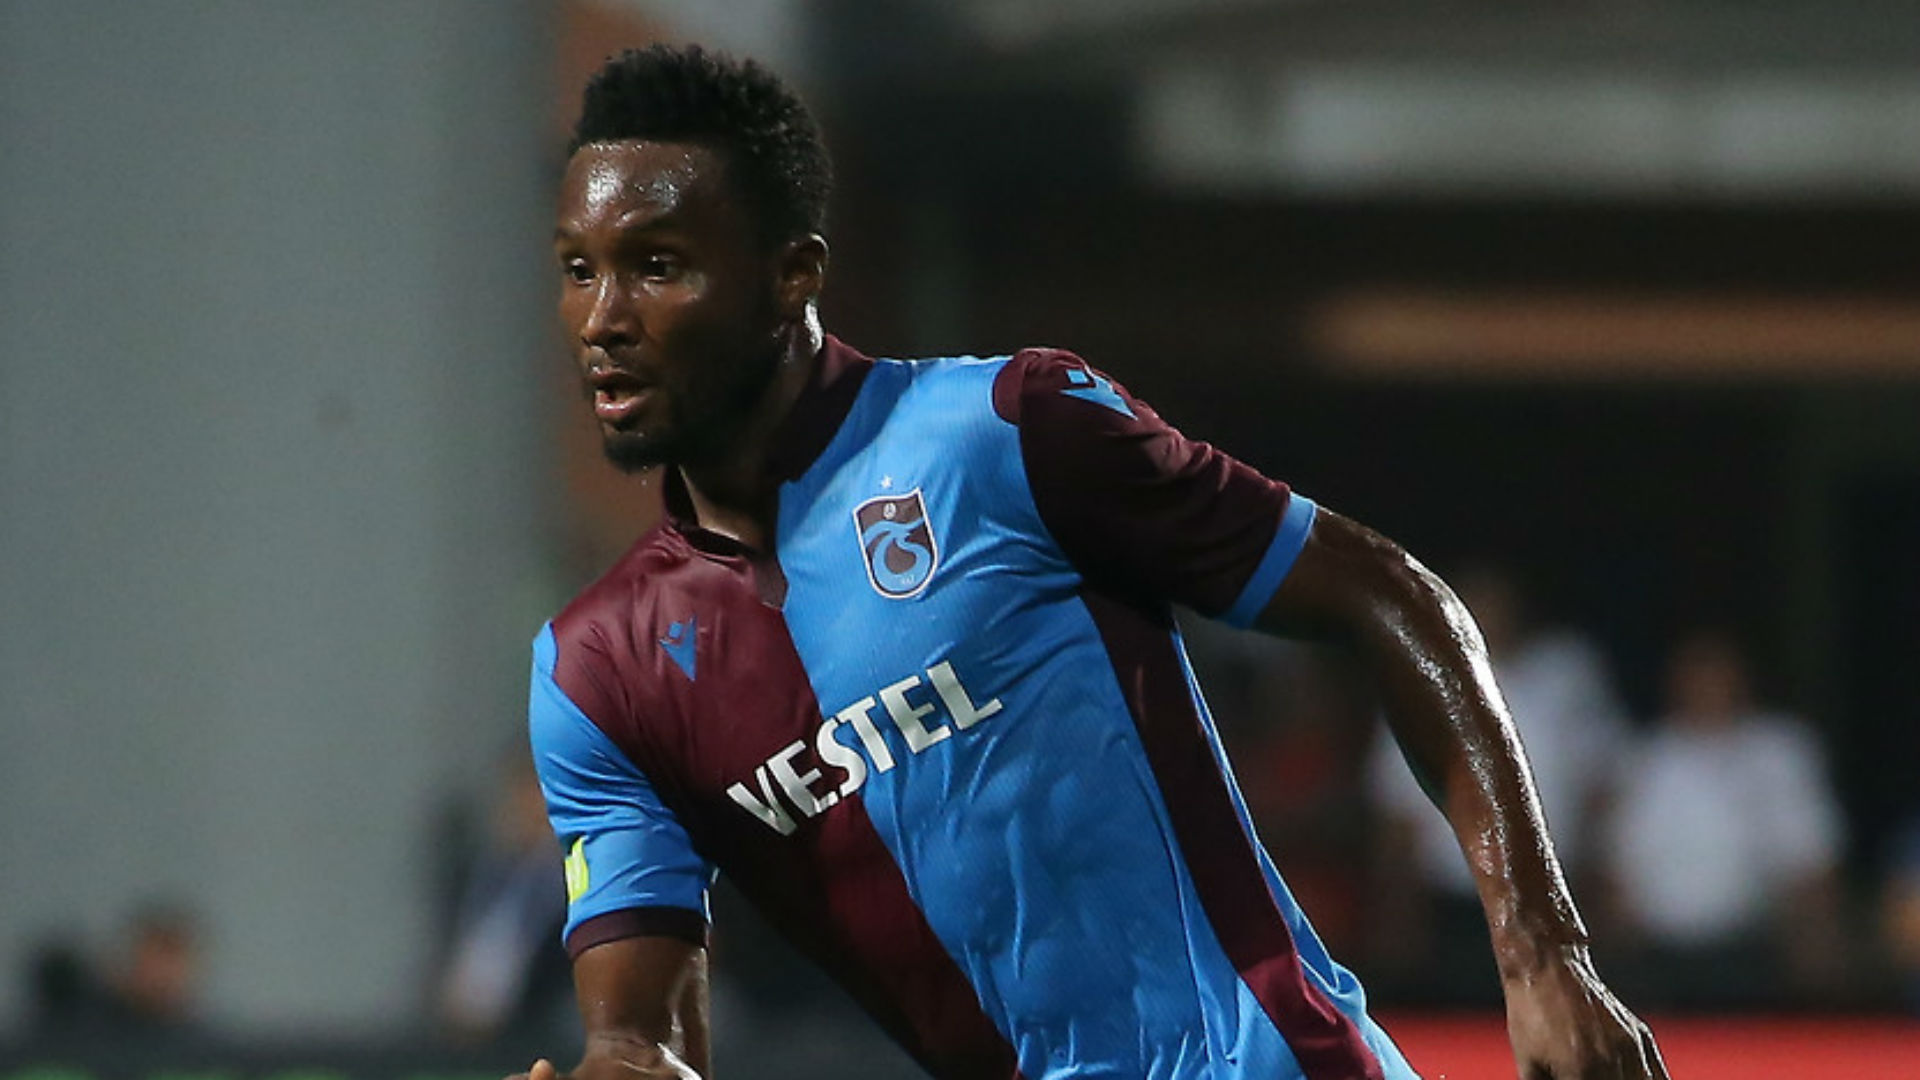 Mikel: Leaving Trabzonspor was one of the hardest decisions for me